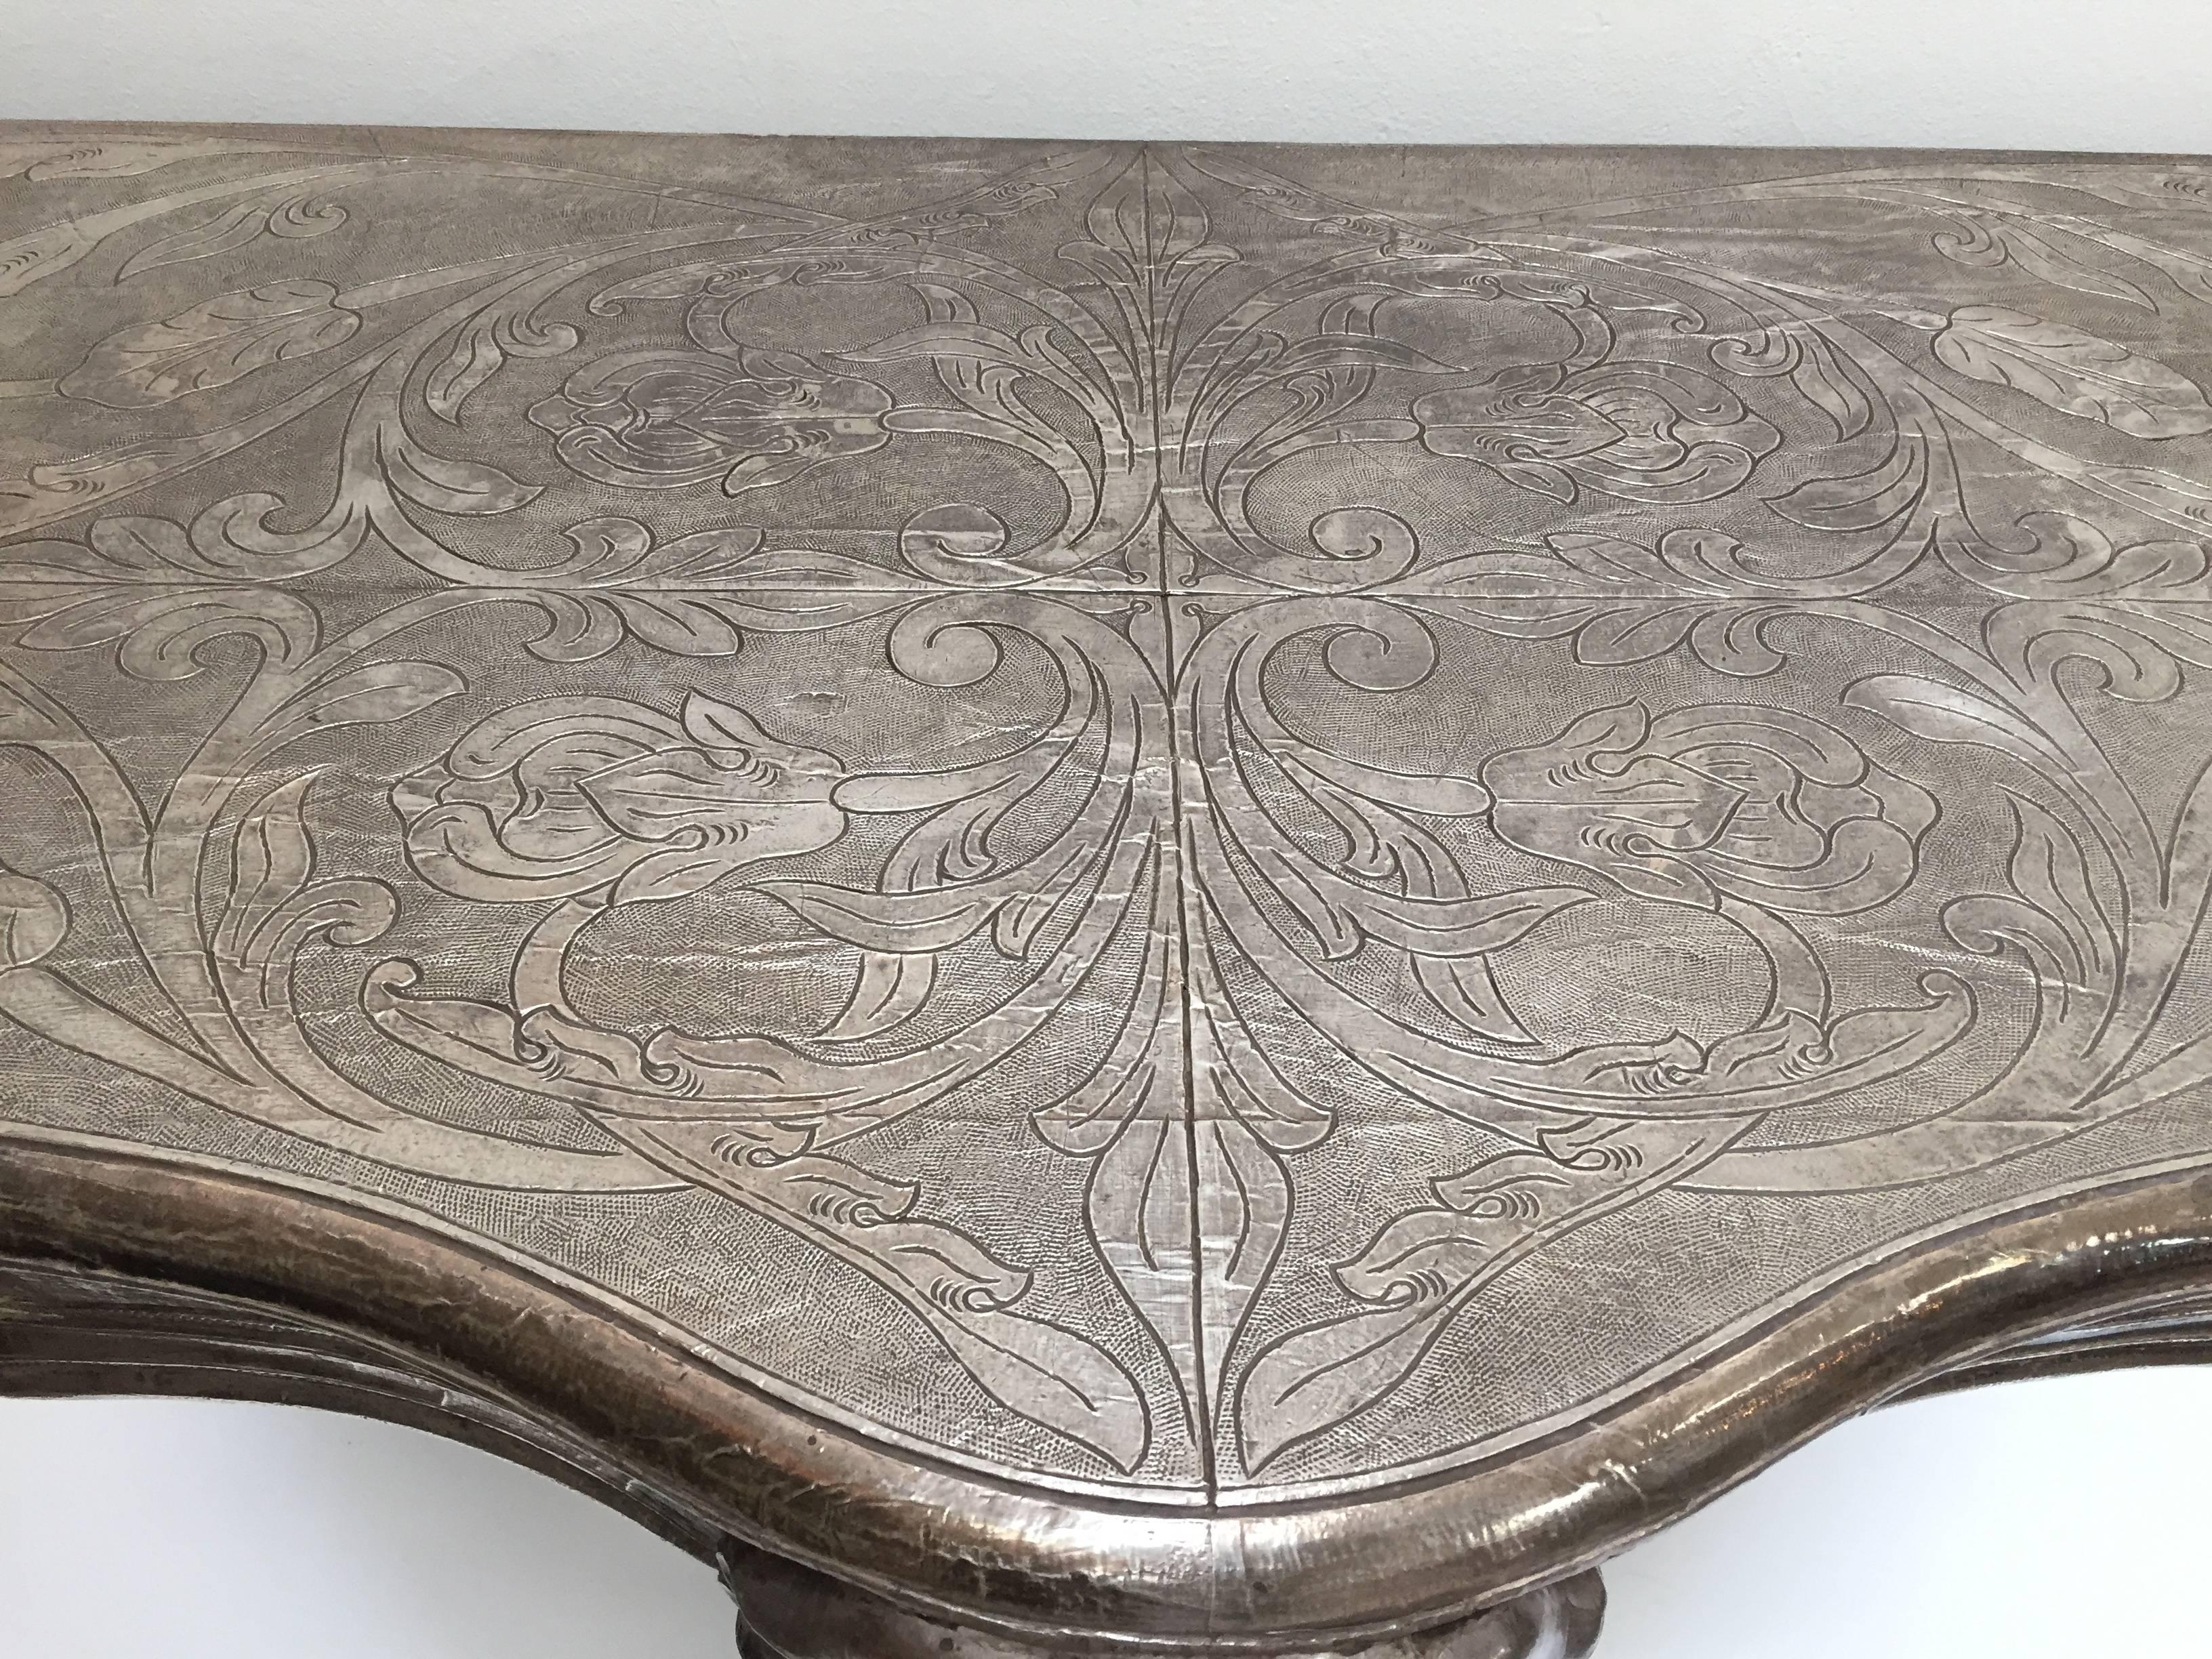 Anglo-Indian silvered chased console covered entirely in silver metal, the form of this console is inspired by the European taste.
This console table feature a wooden frame wrapped clad silver metal in floral embossed designs.
French Louis XV